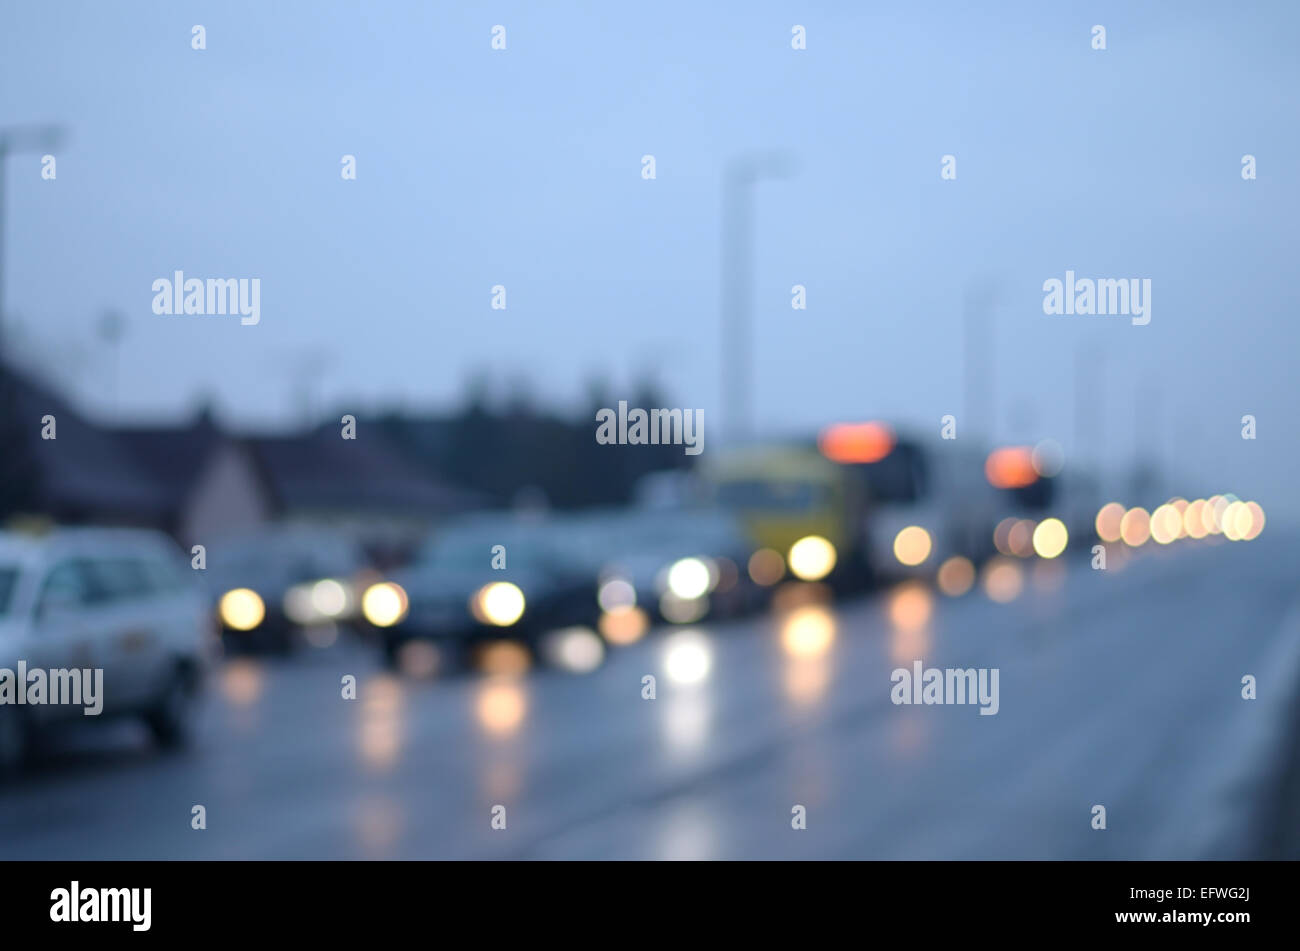 Blurred photo of evening traffic, detail Stock Photo